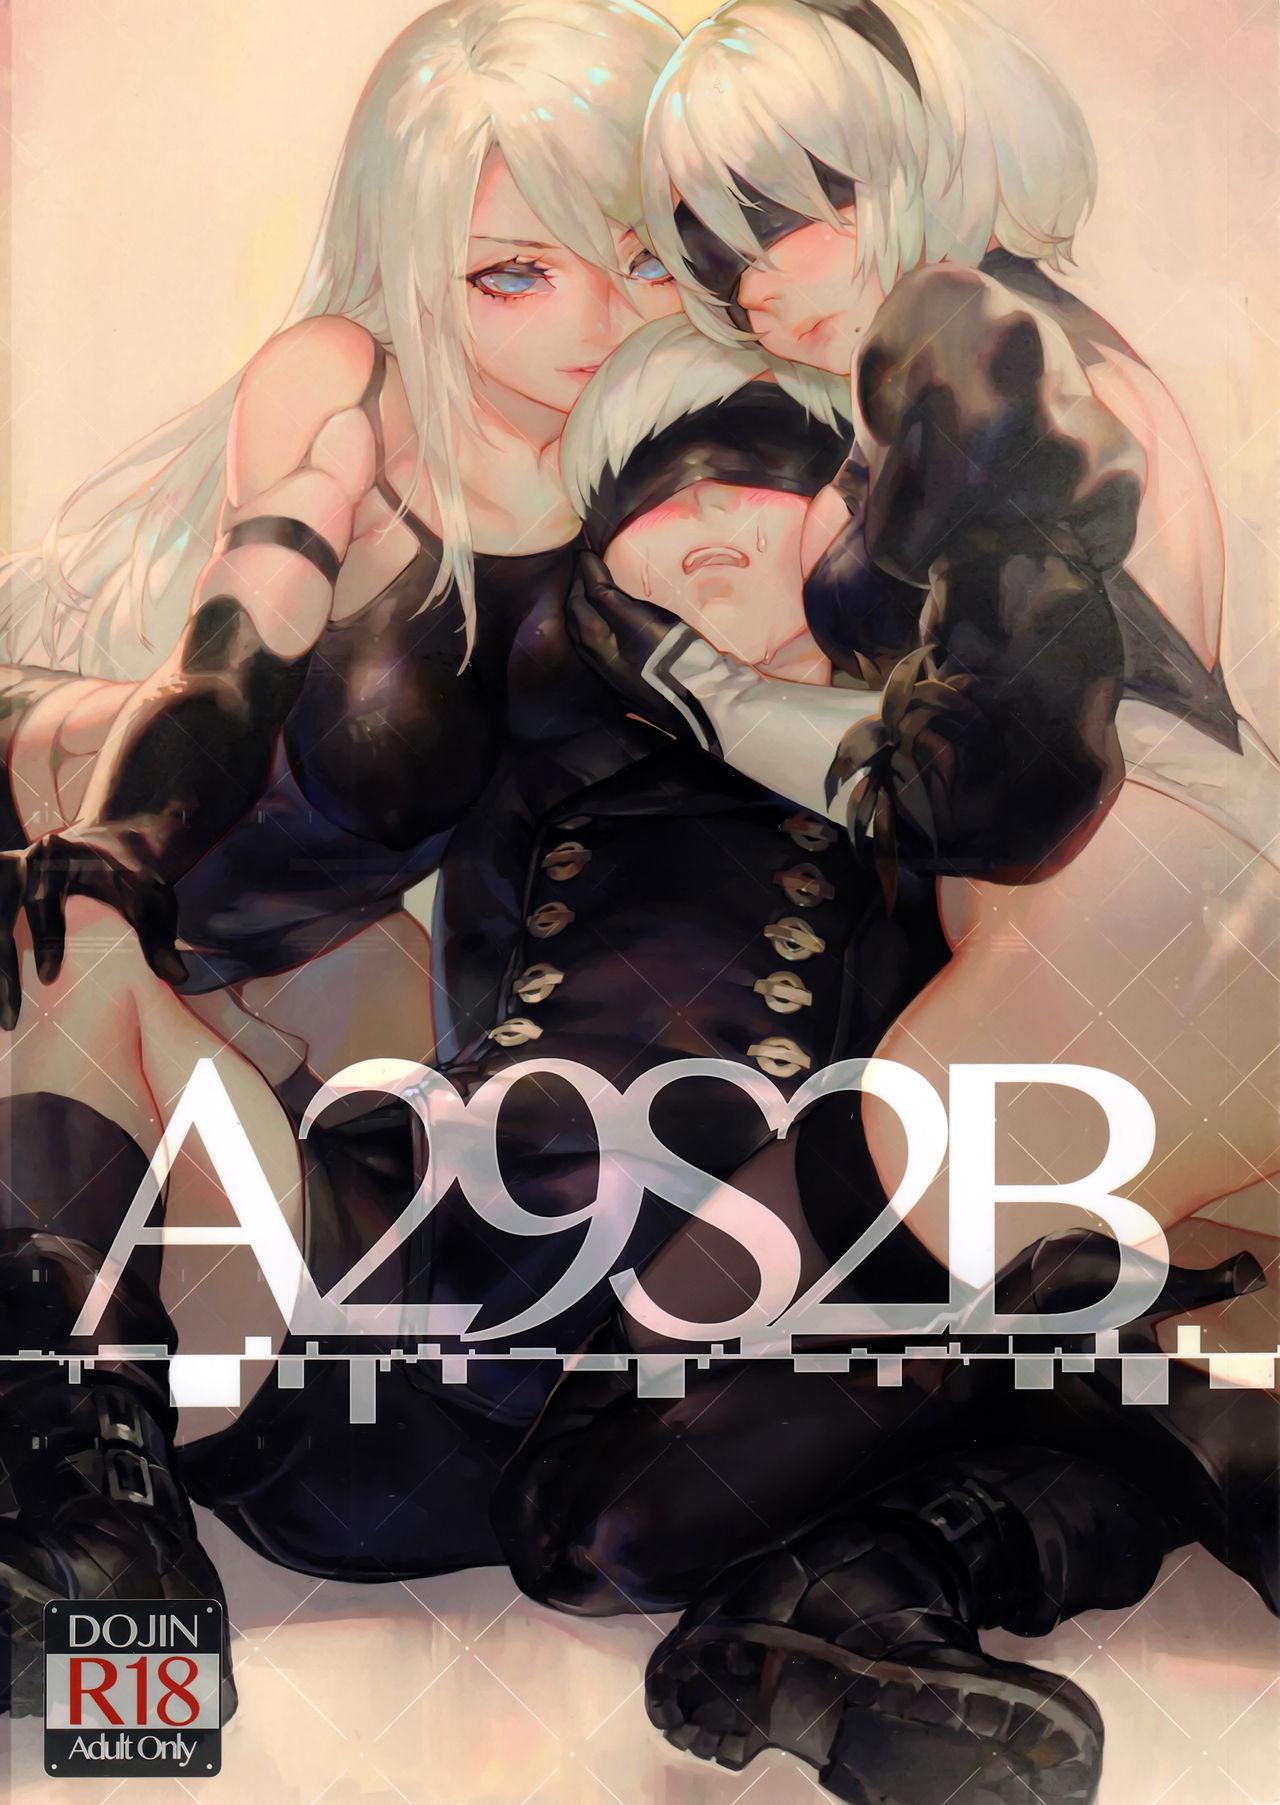 Usa A29S2B - Nier automata Foreskin - Picture 1